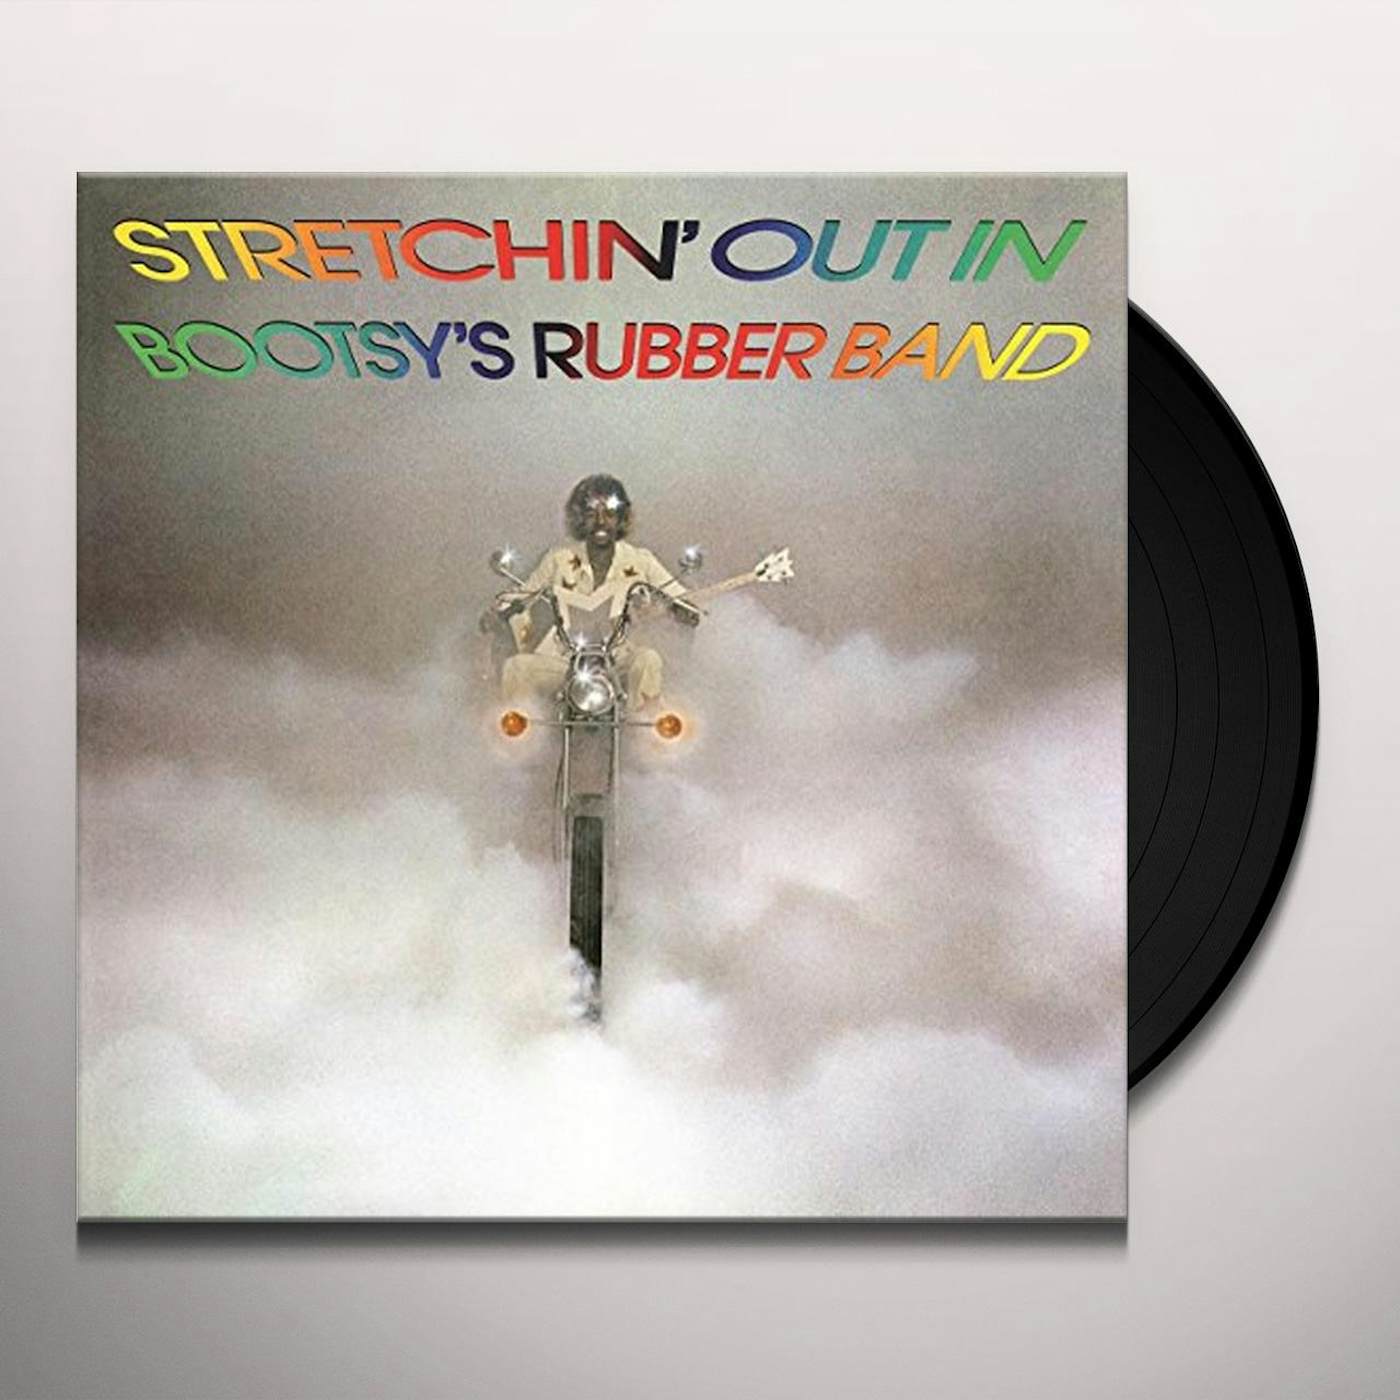 STRETCHIN OUT IN BOOTSY'S RUBBER BAND (180G) Vinyl Record